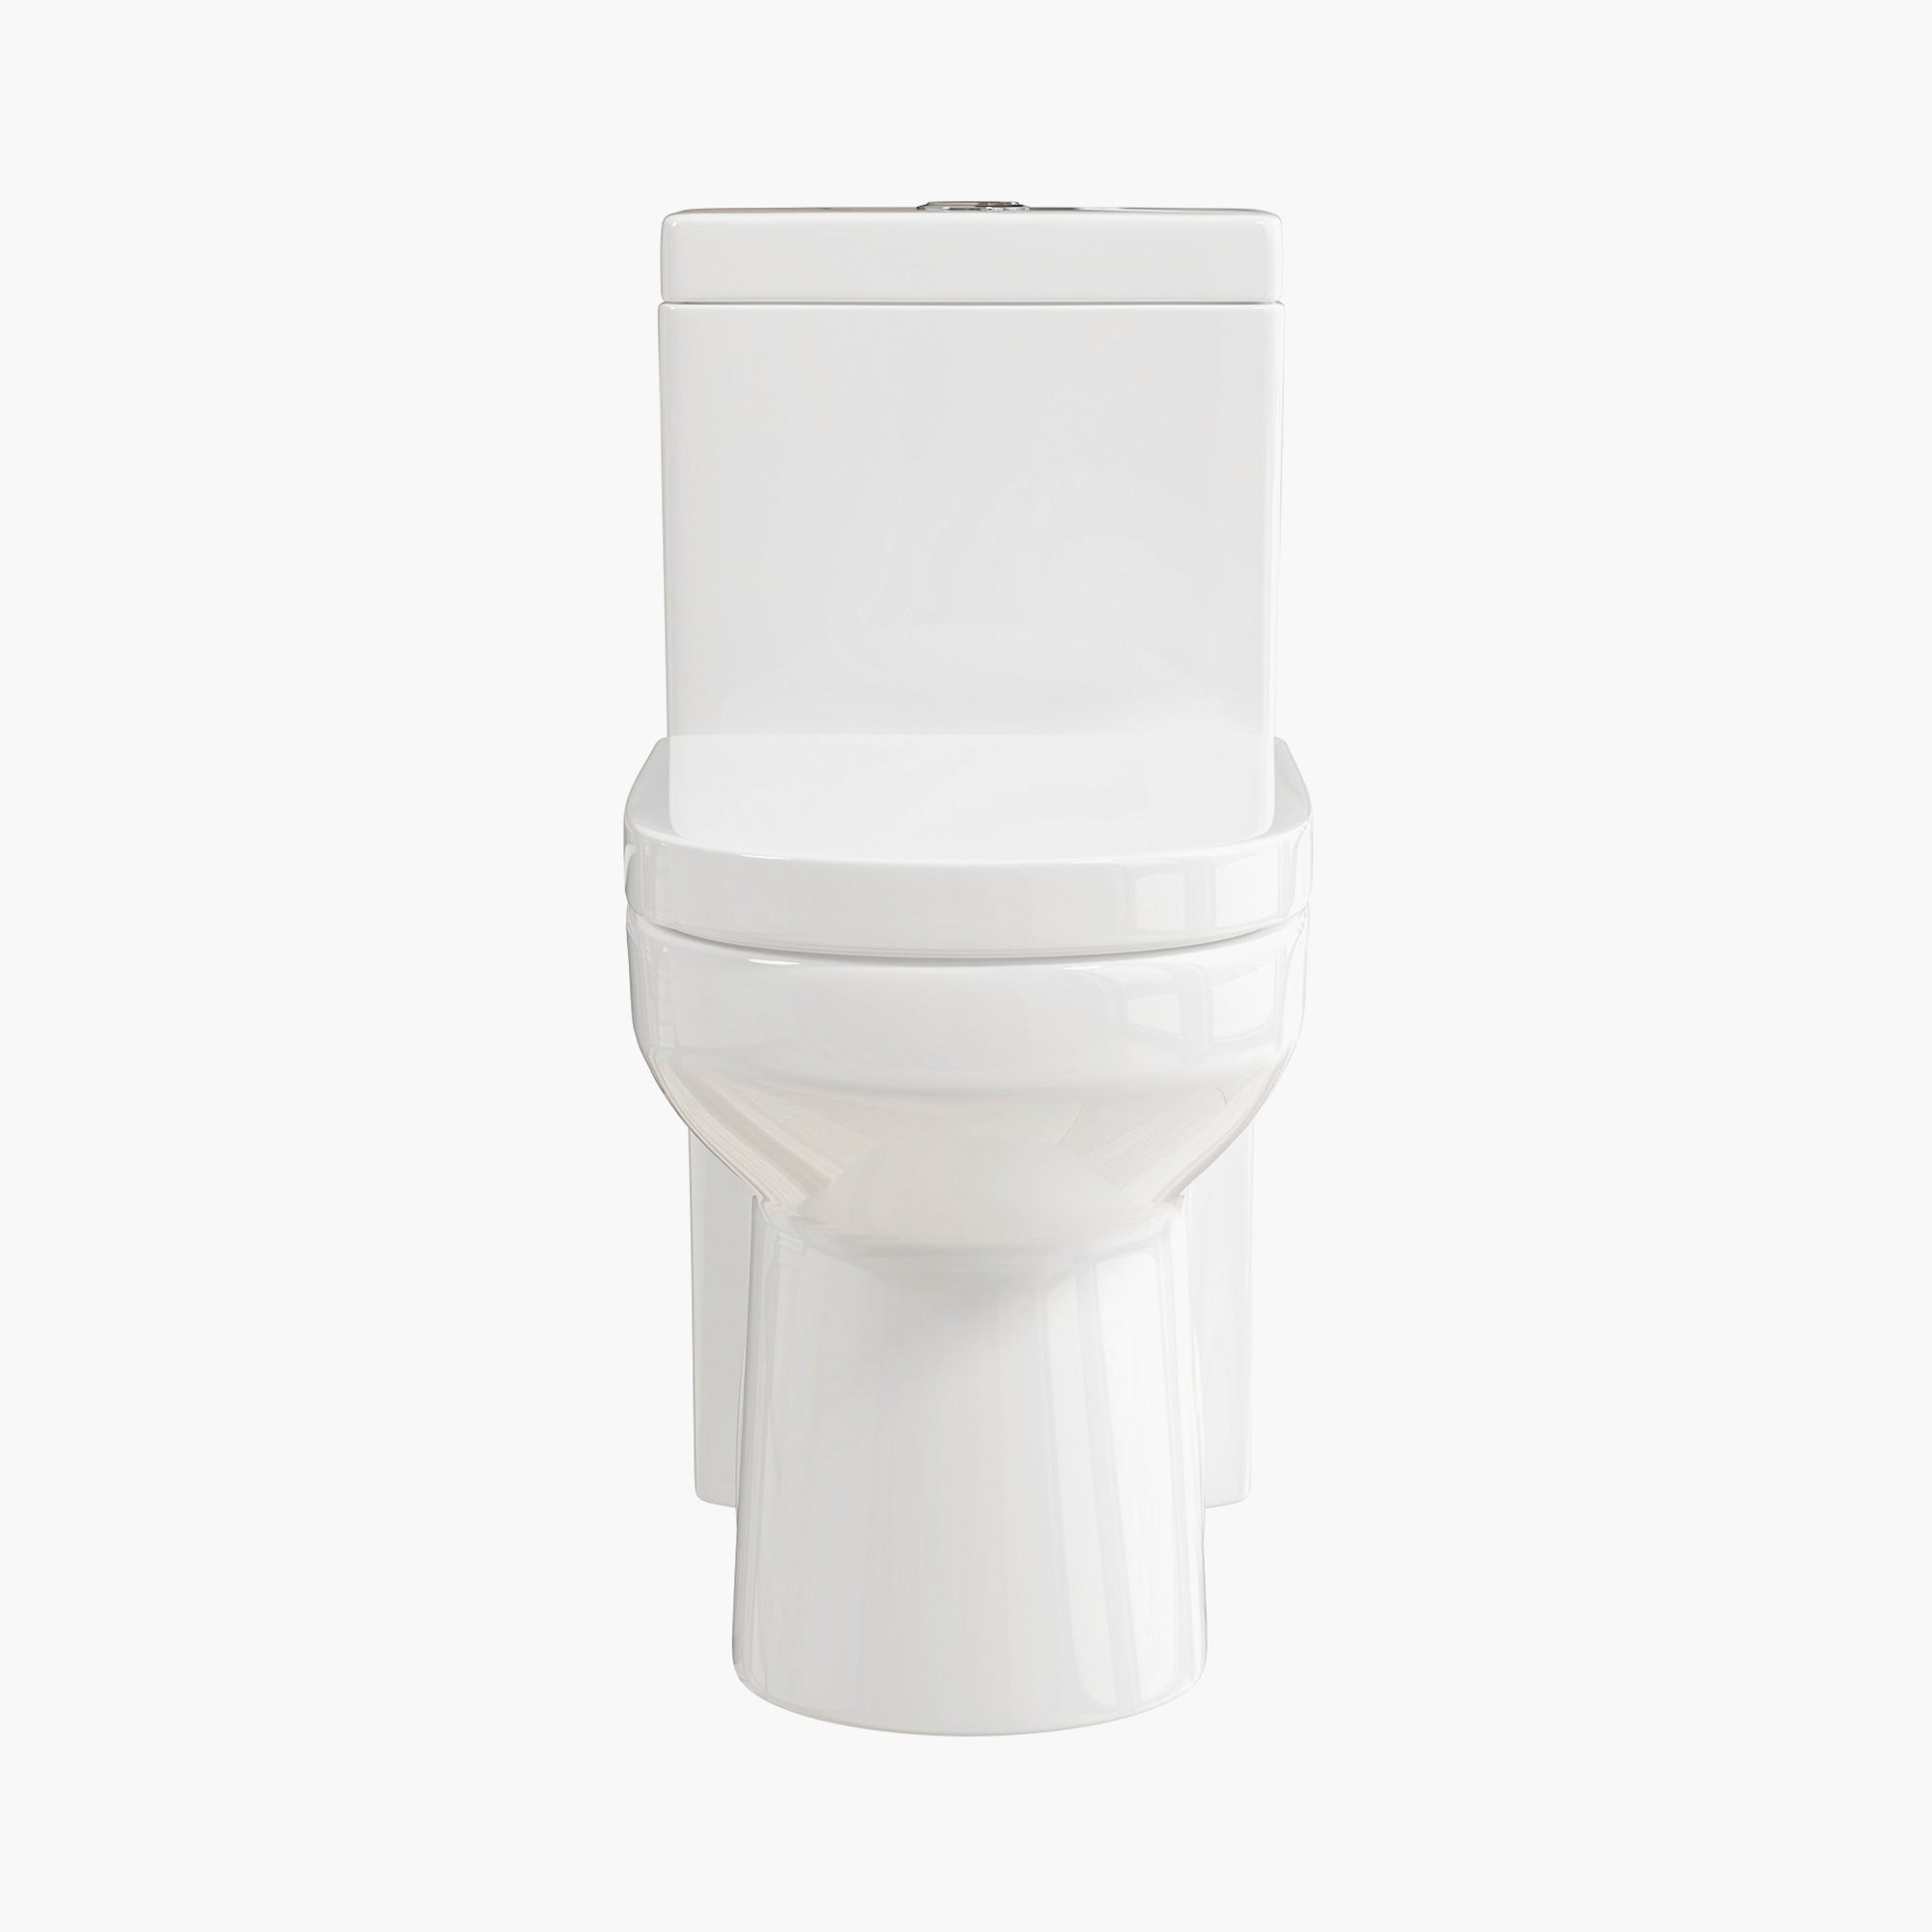 HOROW Small Toilet 1.28 GPF 10 Inch Rough In Toilet Model 8733-10